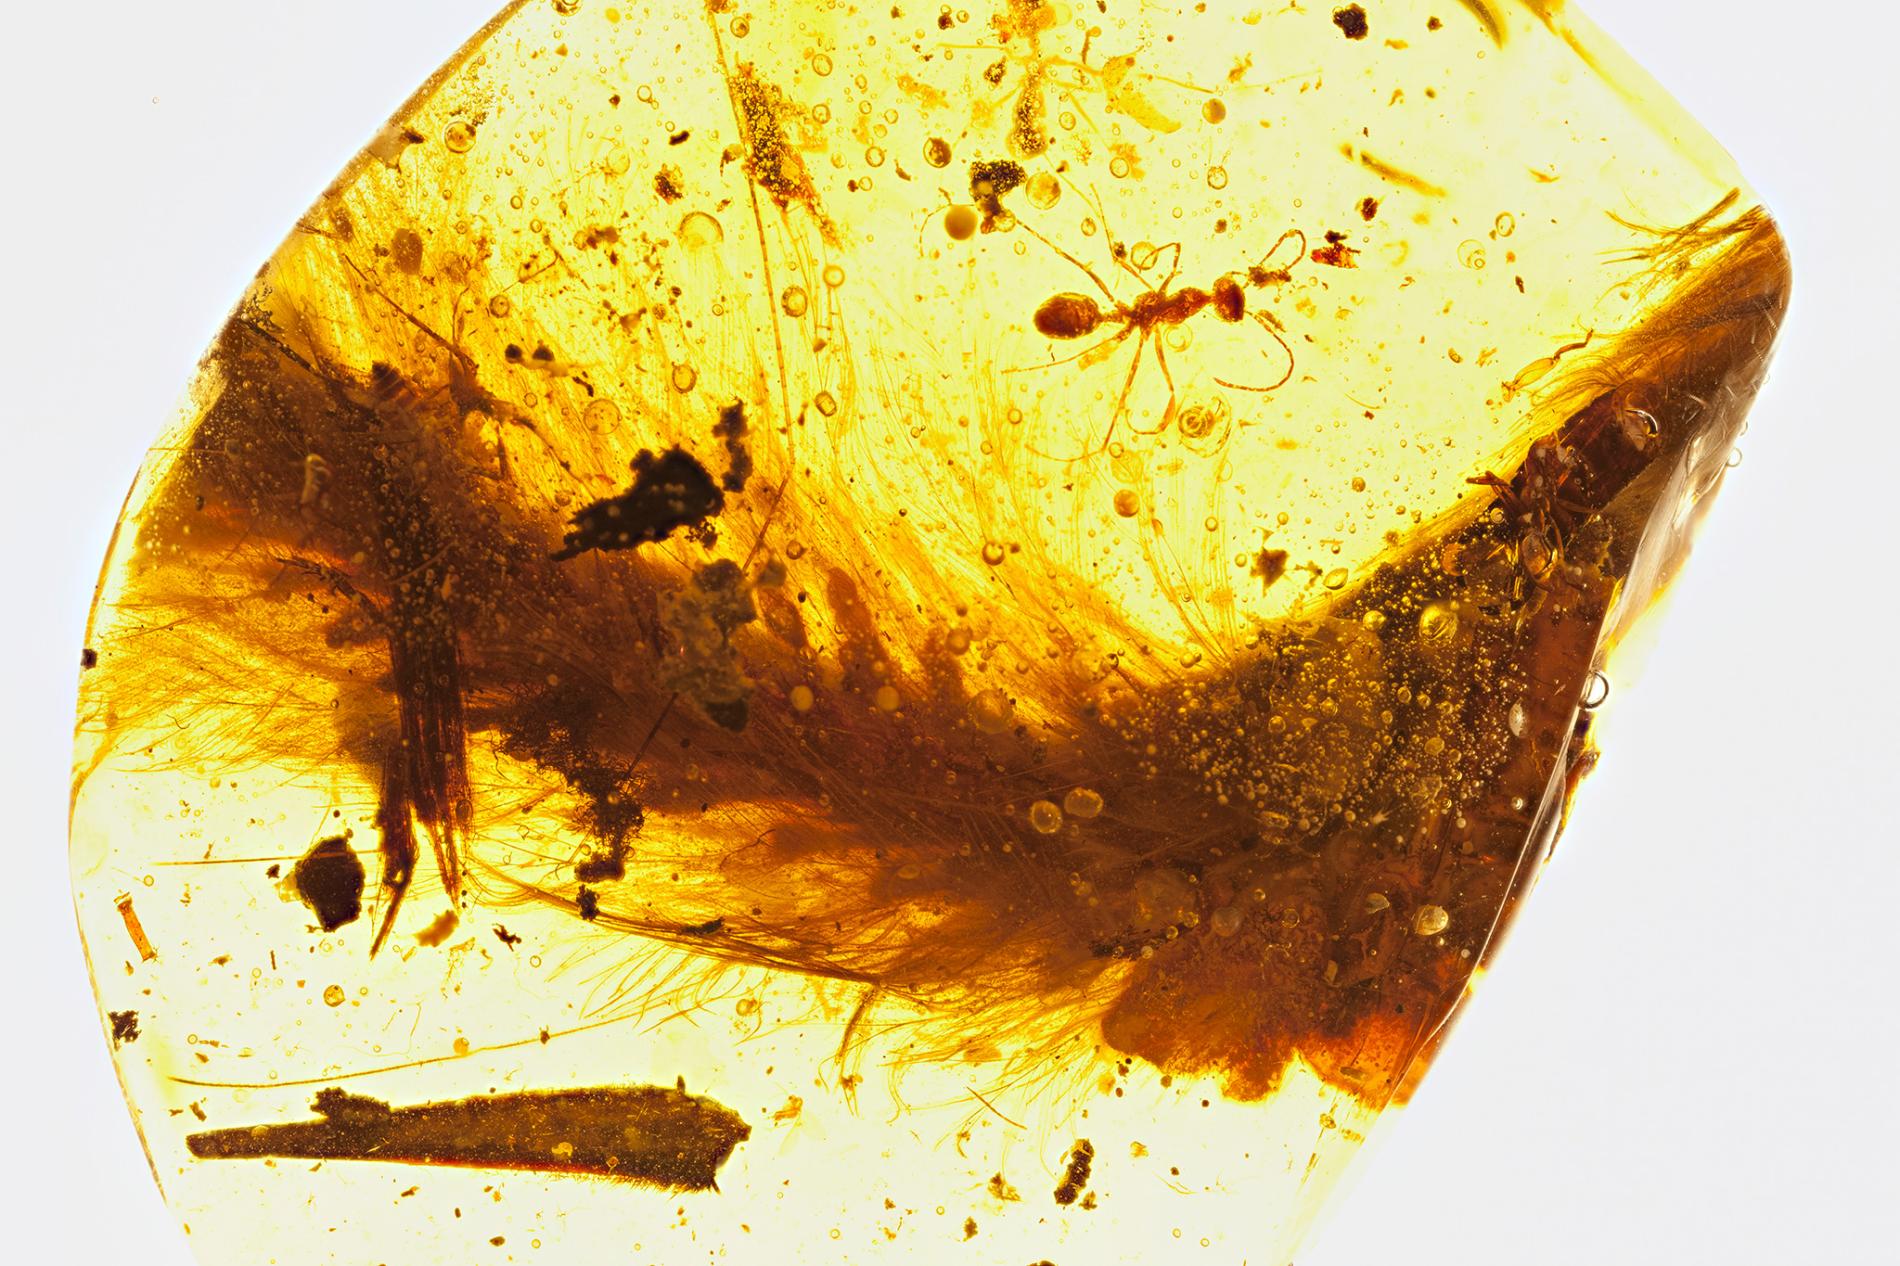 A segment from the feathered tail of a dinosaur that lived 99 million years ago is preserved in amber. A Cretaceous-era ant and plant debris were also trapped in the resin. PHOTOGRAPH BY R.C. MCKELLAR, ROYAL SASKATCHEWAN MUSEUM